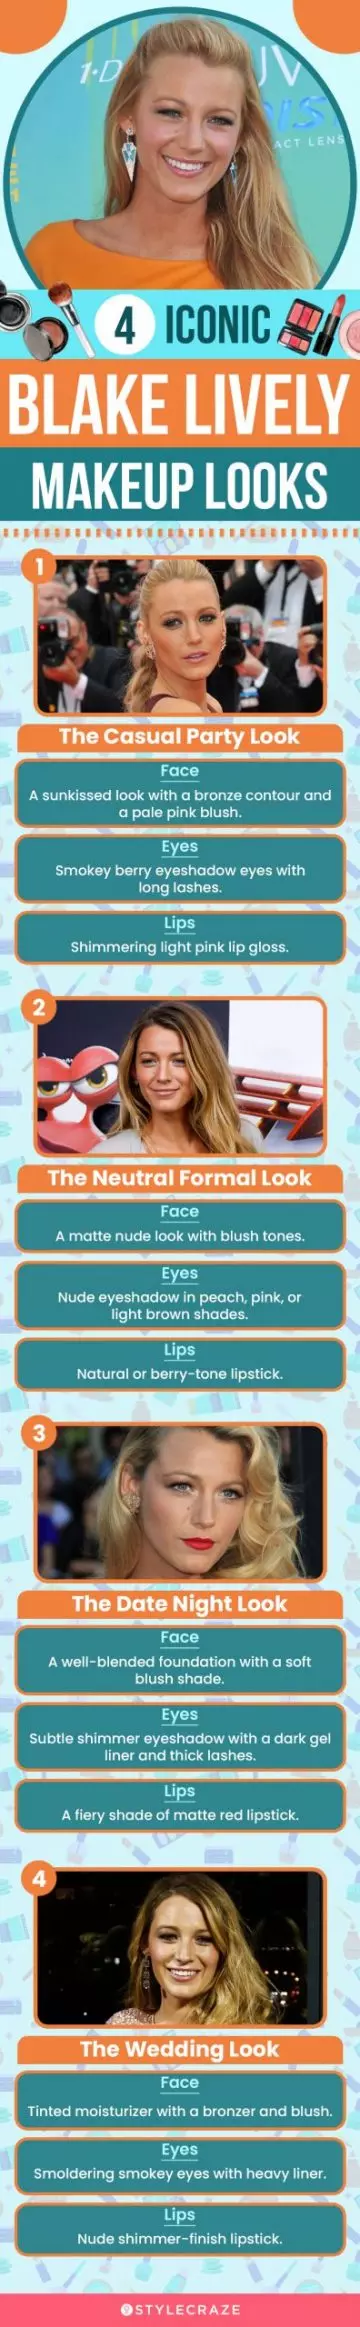 4 iconic blake lively makeup looks (infographic)